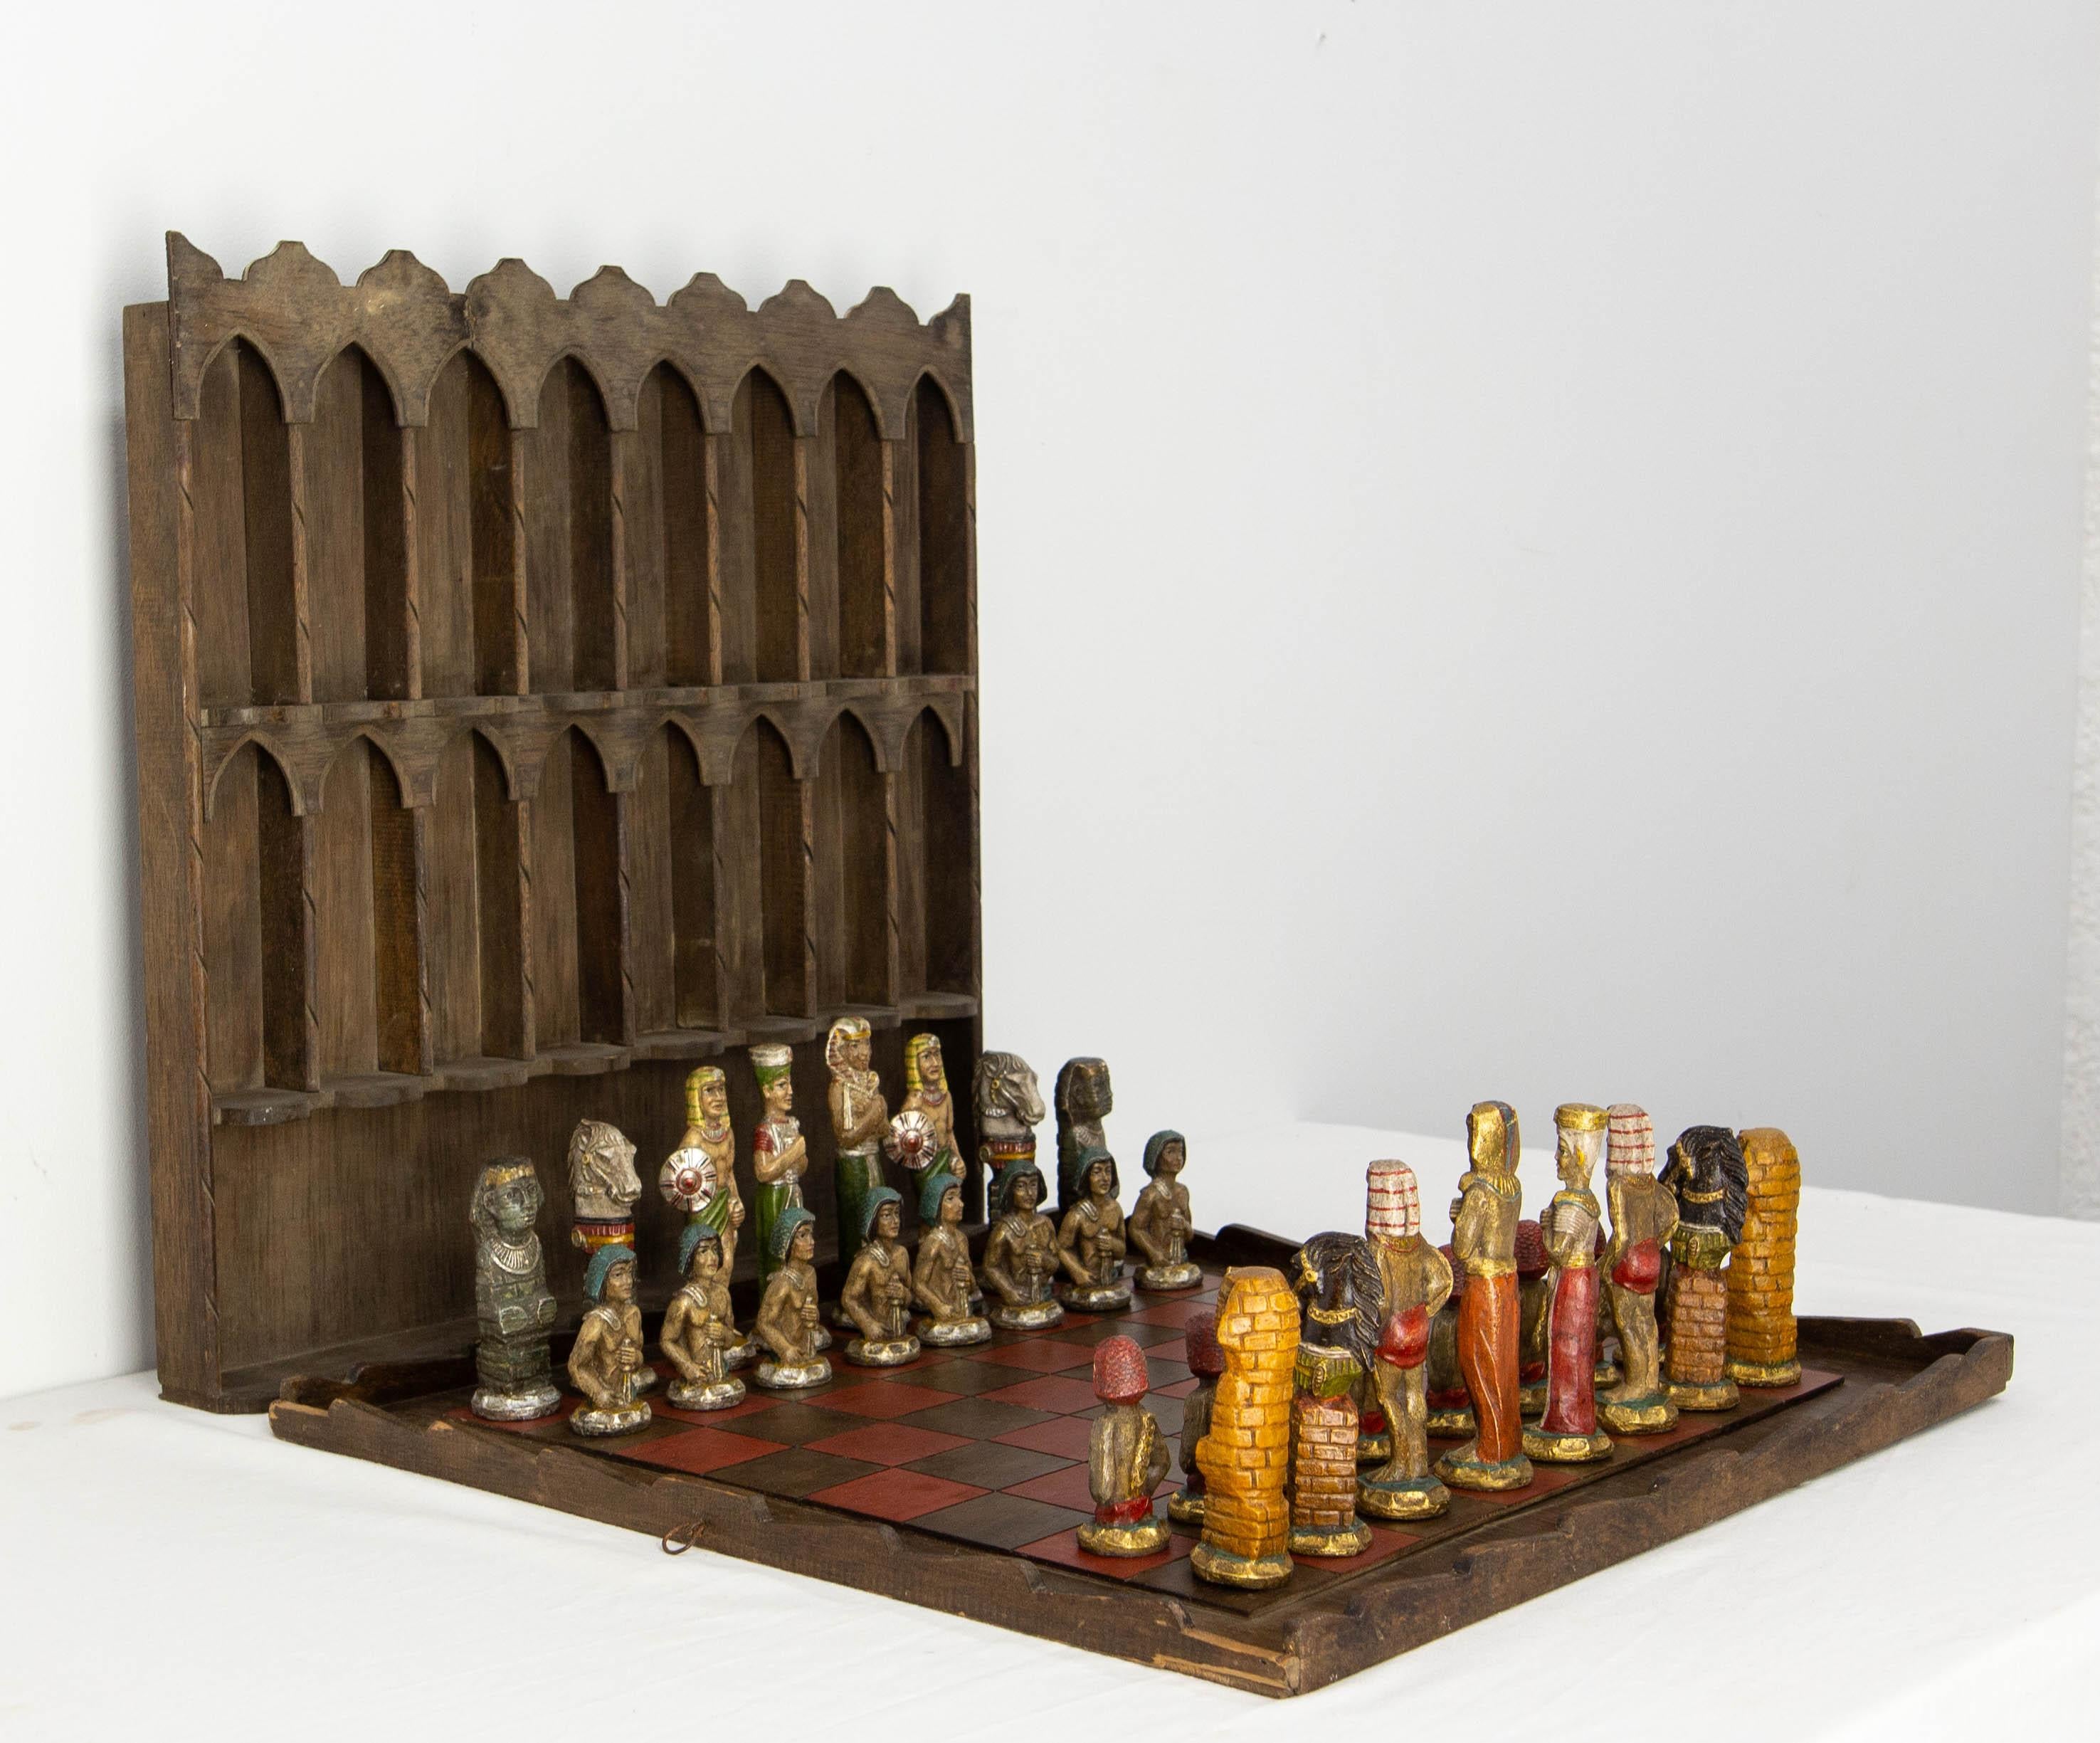 French chess game in the thematic of Ancient Egypt. The chess pieces are in painted and waxed plaster, the board is in wood and the is also a display shelf. Each piece is charaterful and ensemble is amazing.
All the pieces are handmade and were